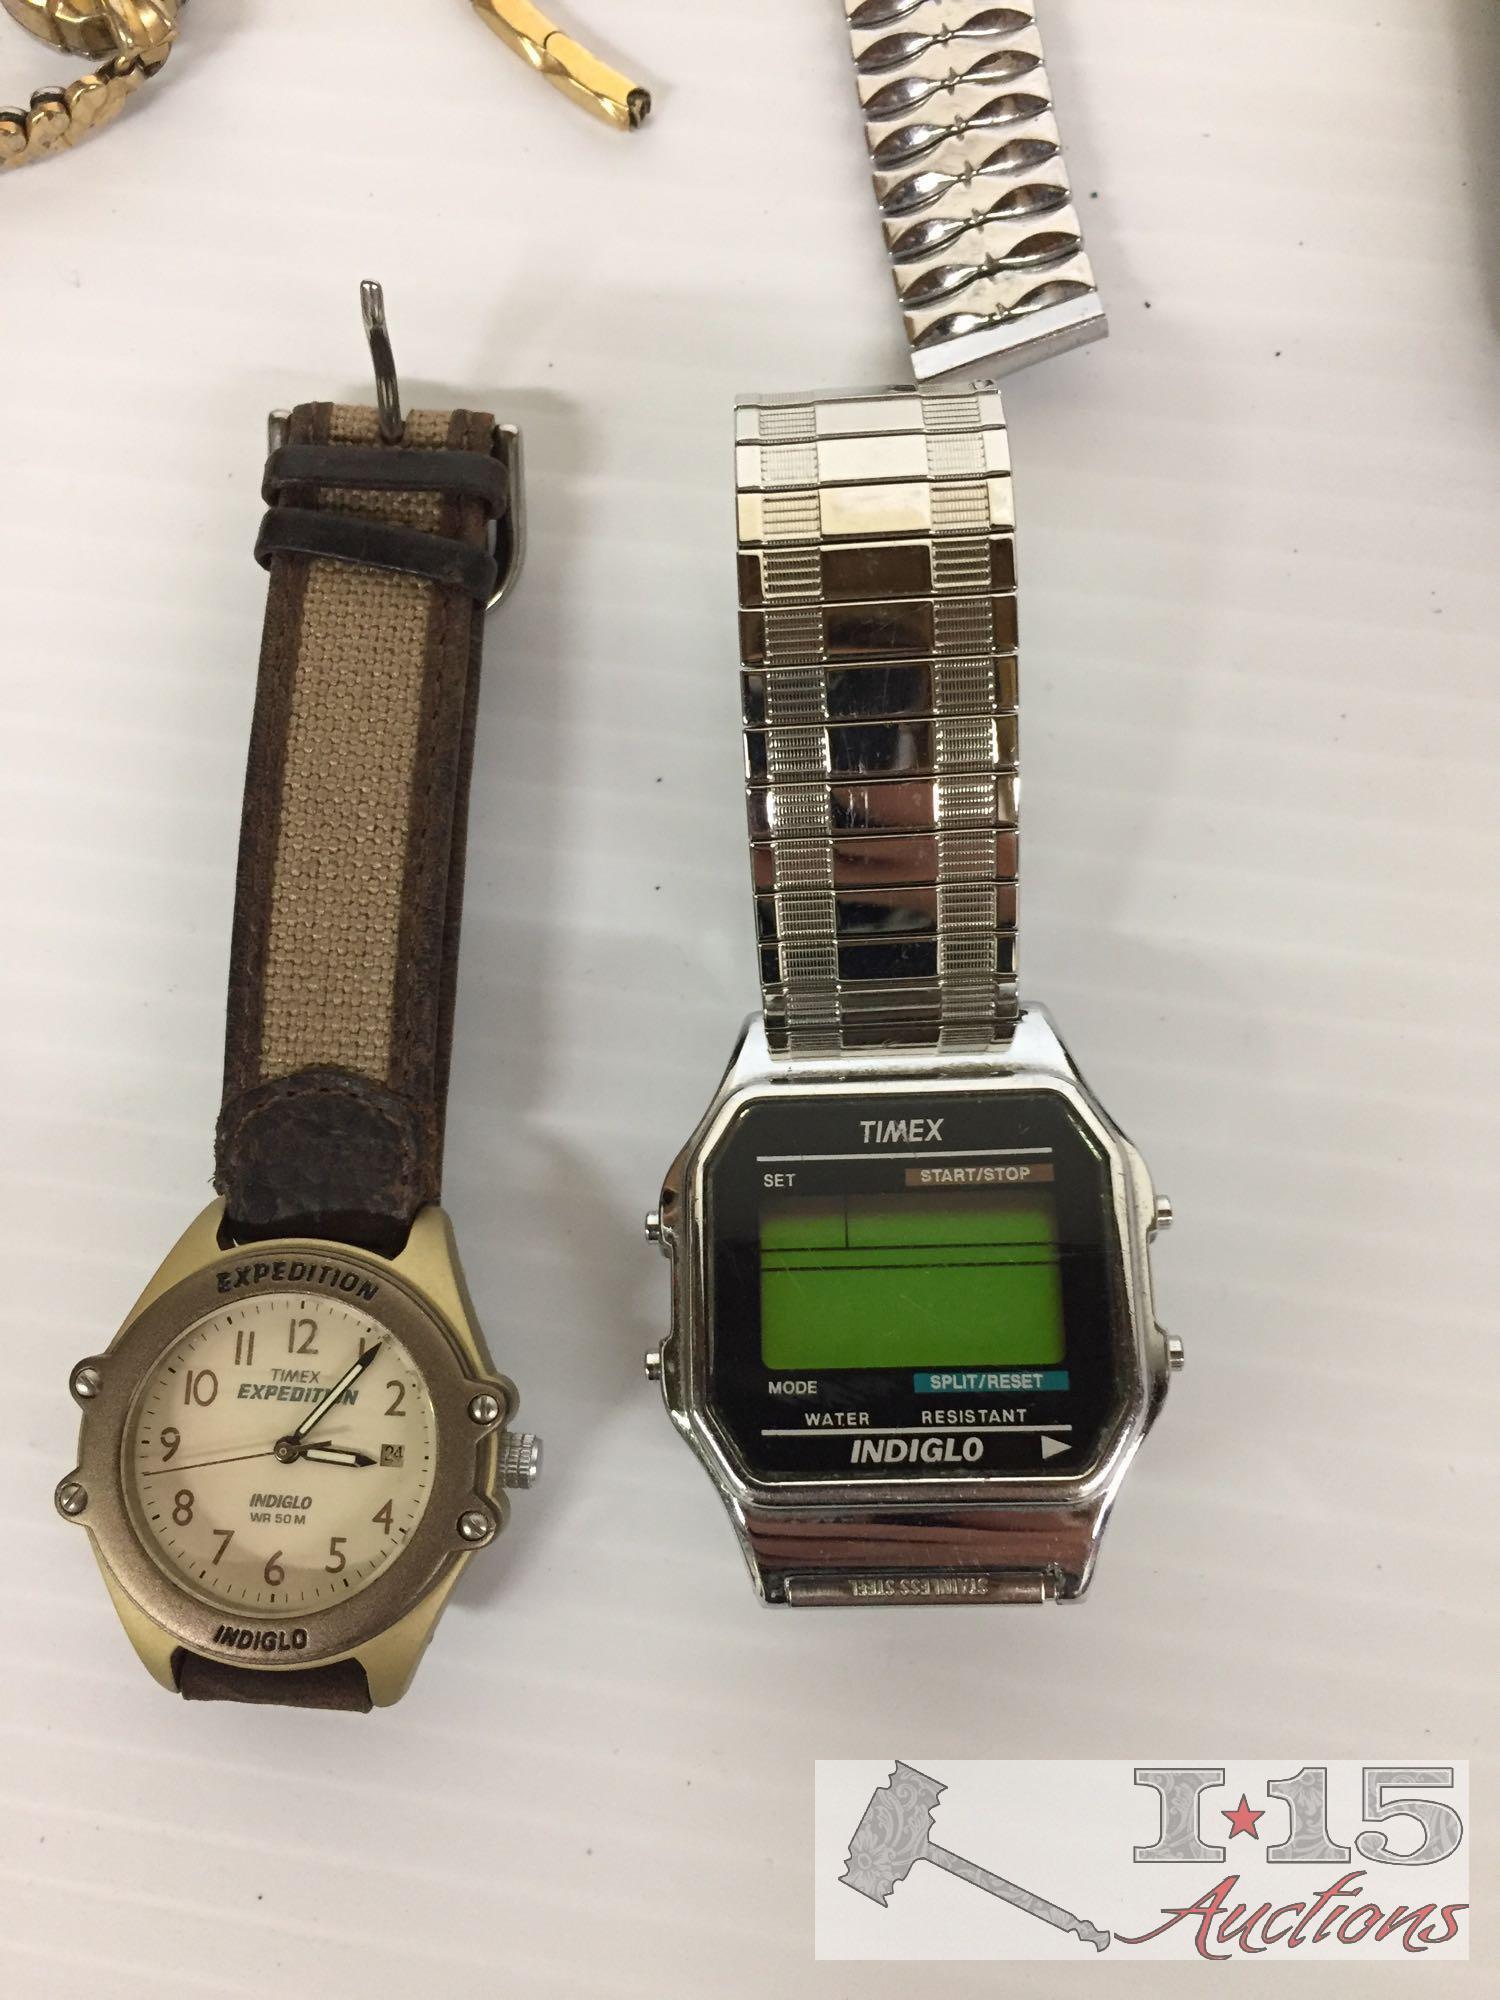 Misc. watch collection